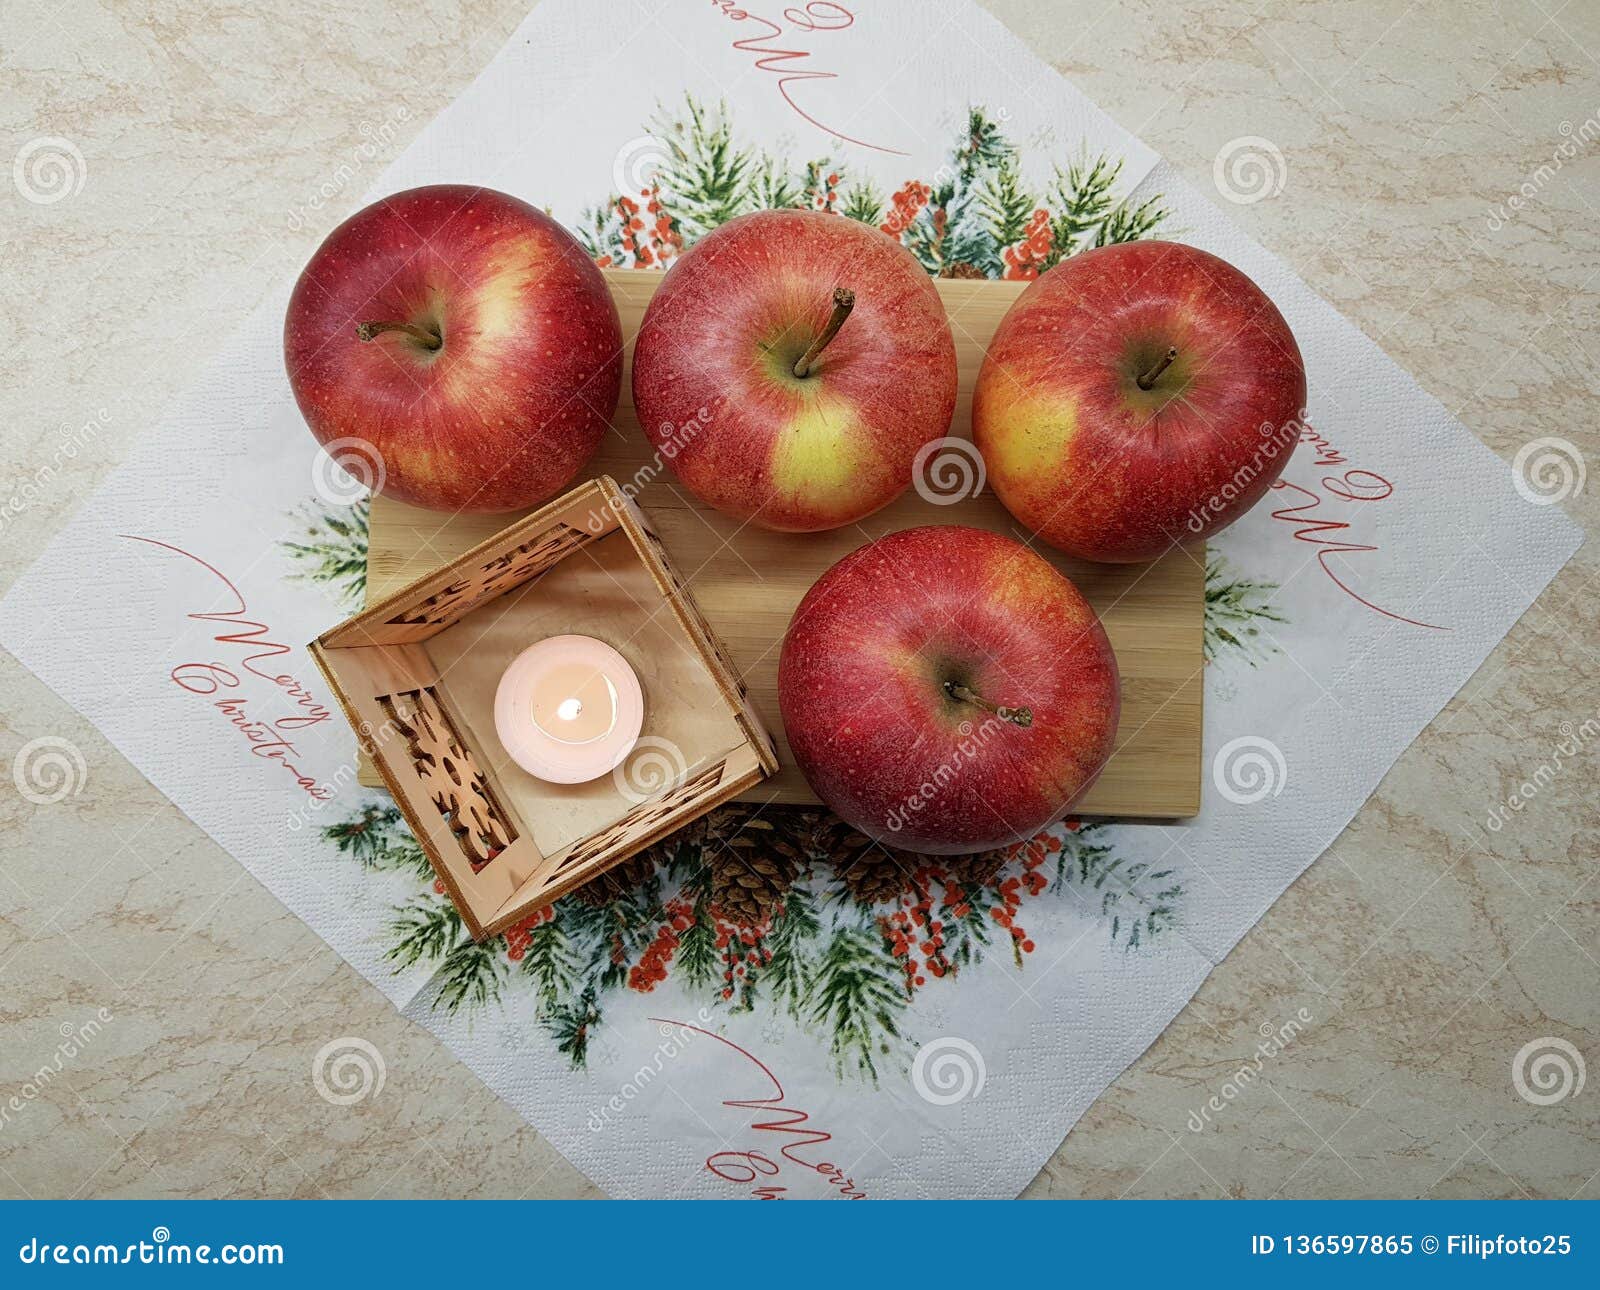 Christmas apples stock image. Image of colorful, festive - 136597865